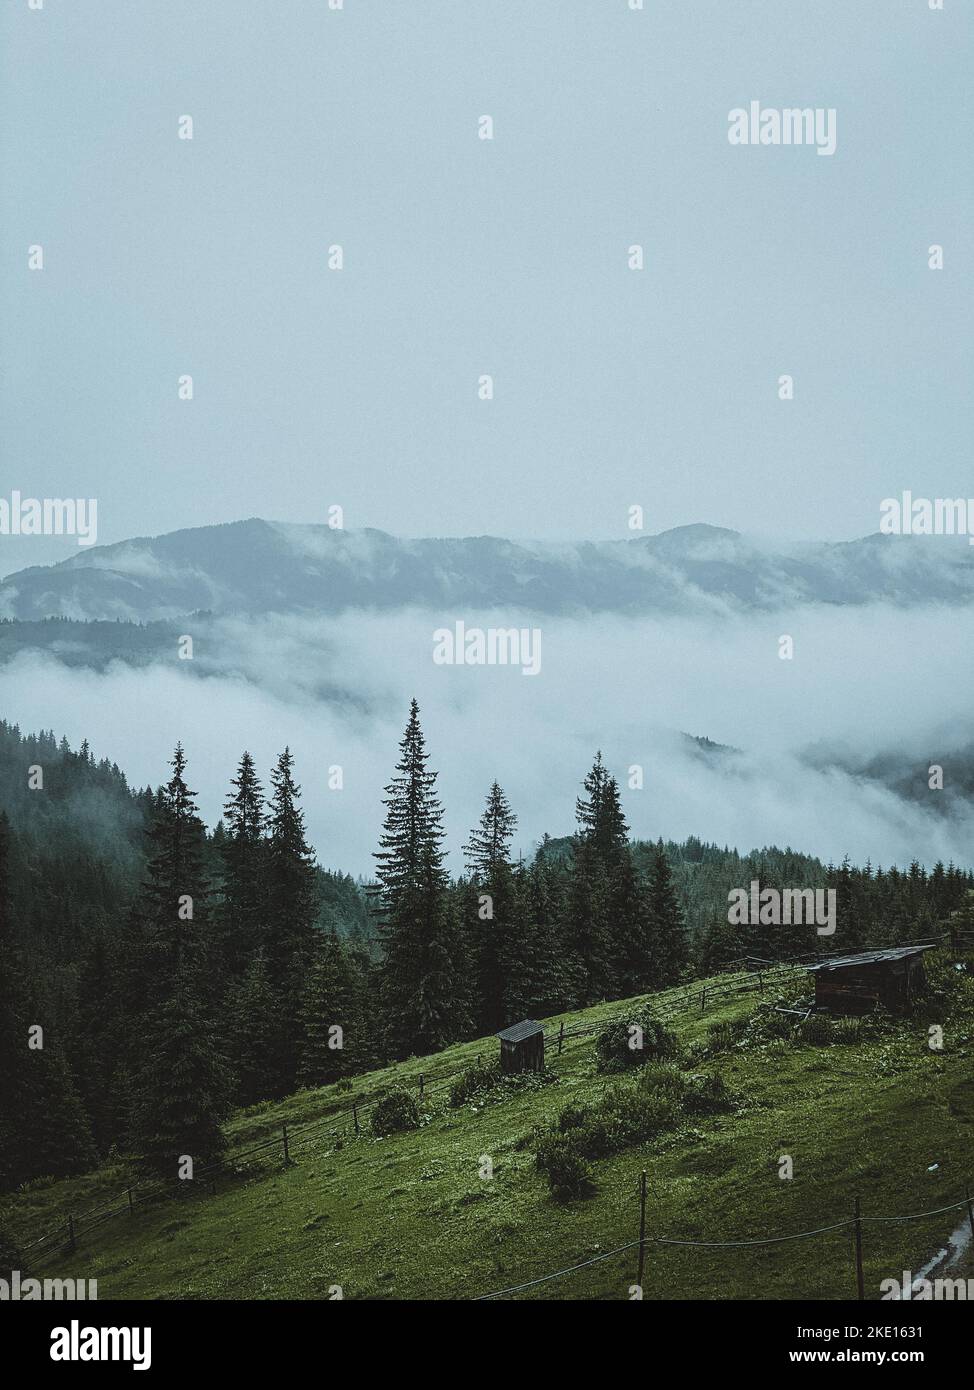 Mountain landscape with fog covered mountain range and pines Stock Photo